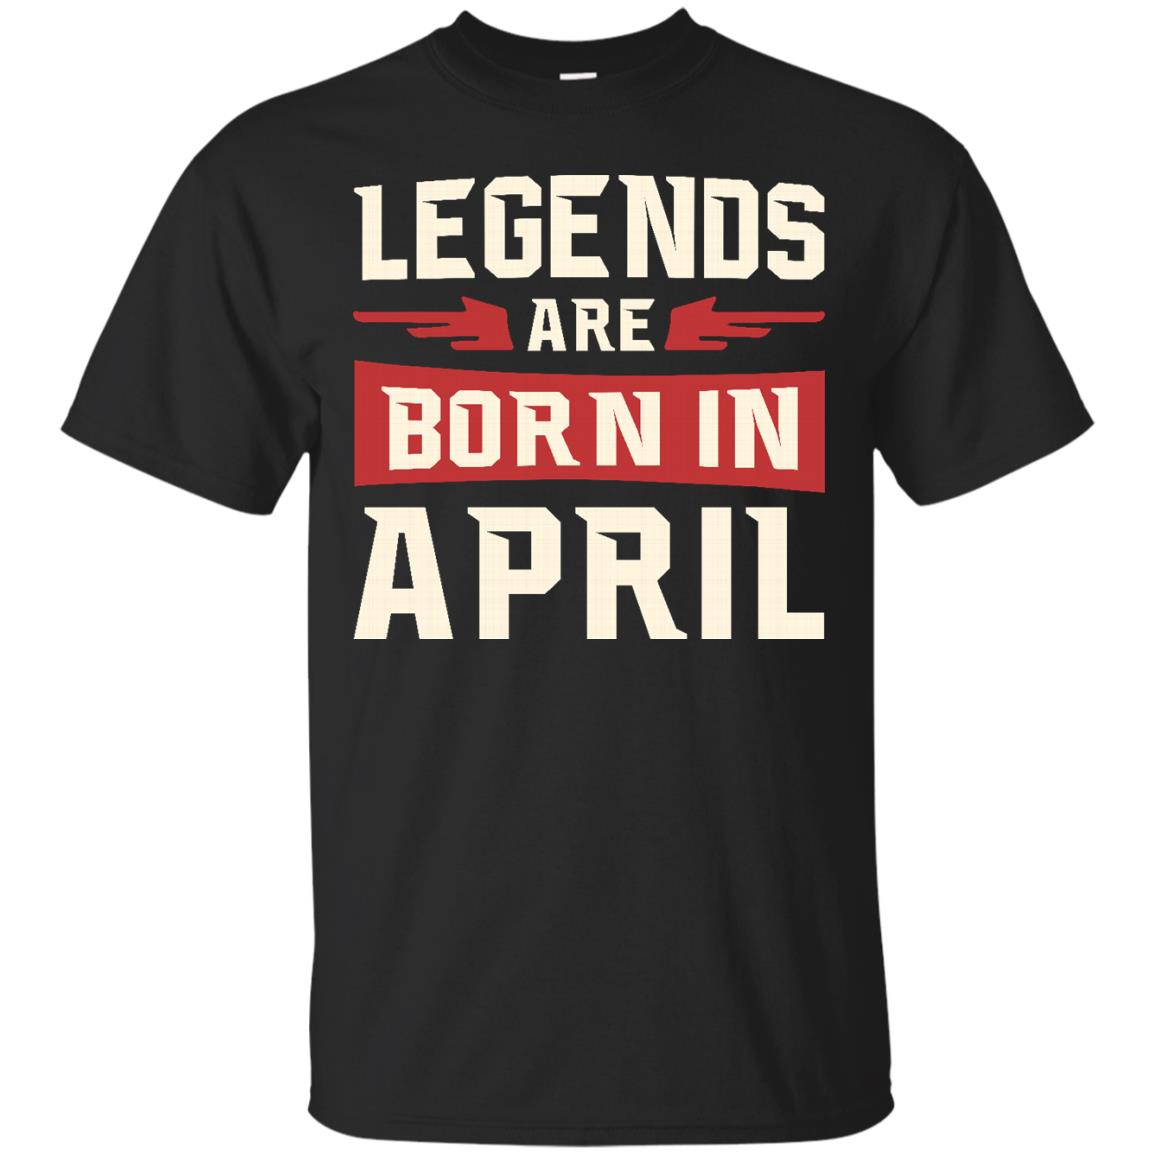 Jason Statham: legends are born in April shirt, hoodie